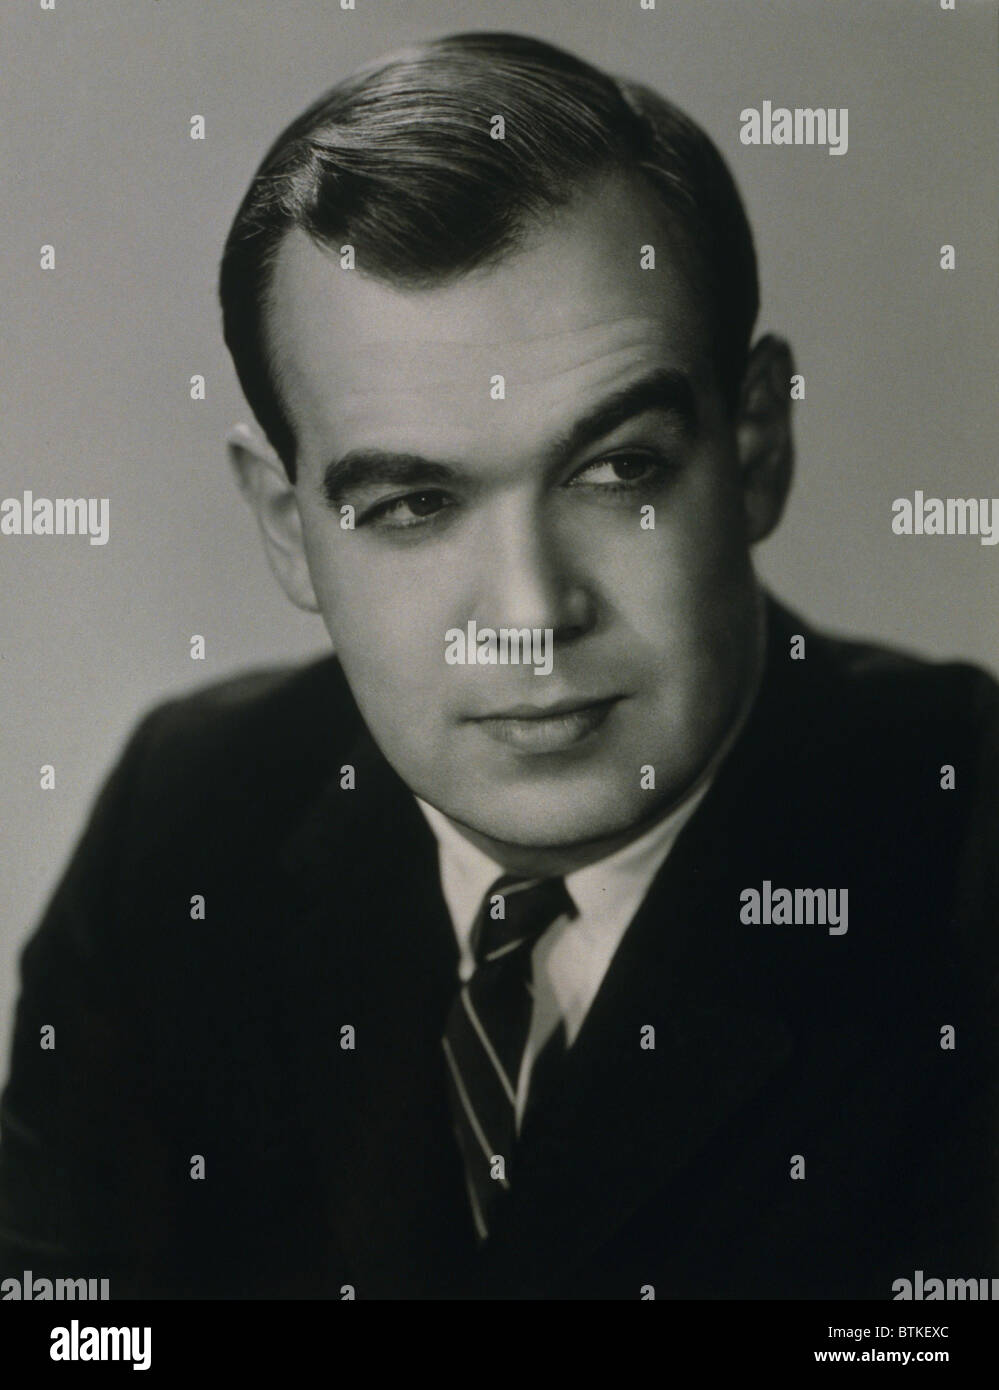 Charles Kuralt (1934-1997), spend most of his career with CBS Television, first with his ON THE ROAD reports and later as the host of CBS NEWS SUNDAY MORNING. 1965. Stock Photo